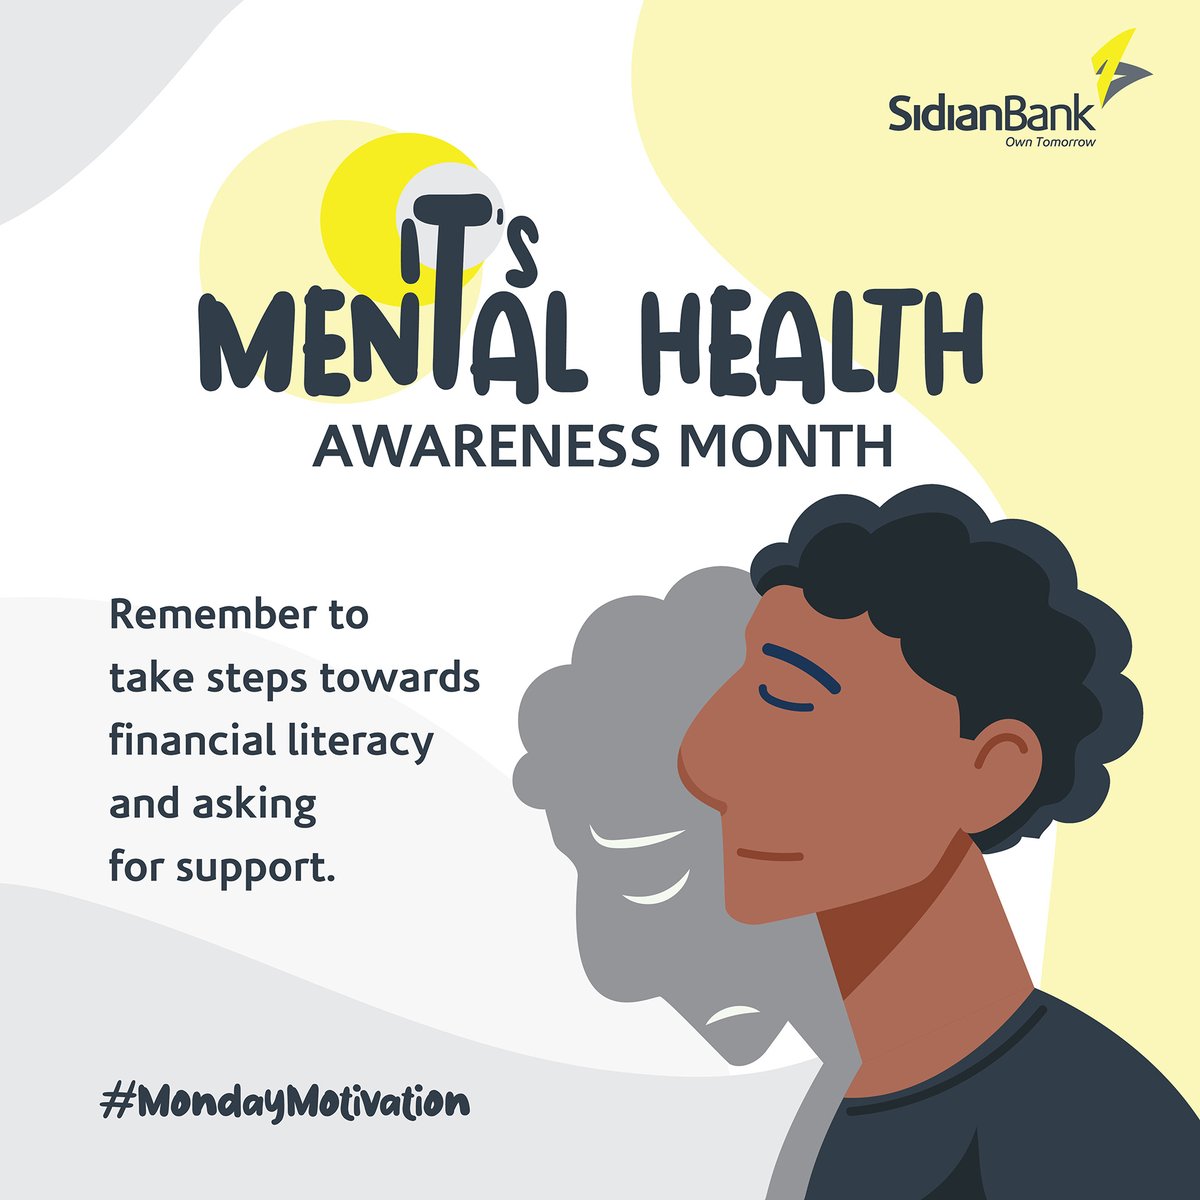 May is #MentalHealthAwarenessMonth and for today’s #MondayMotivation, let’s remember that when things feel difficult, reaching out for support can make a big difference. You’re not alone in this journey!
💪
#FinancialWellness